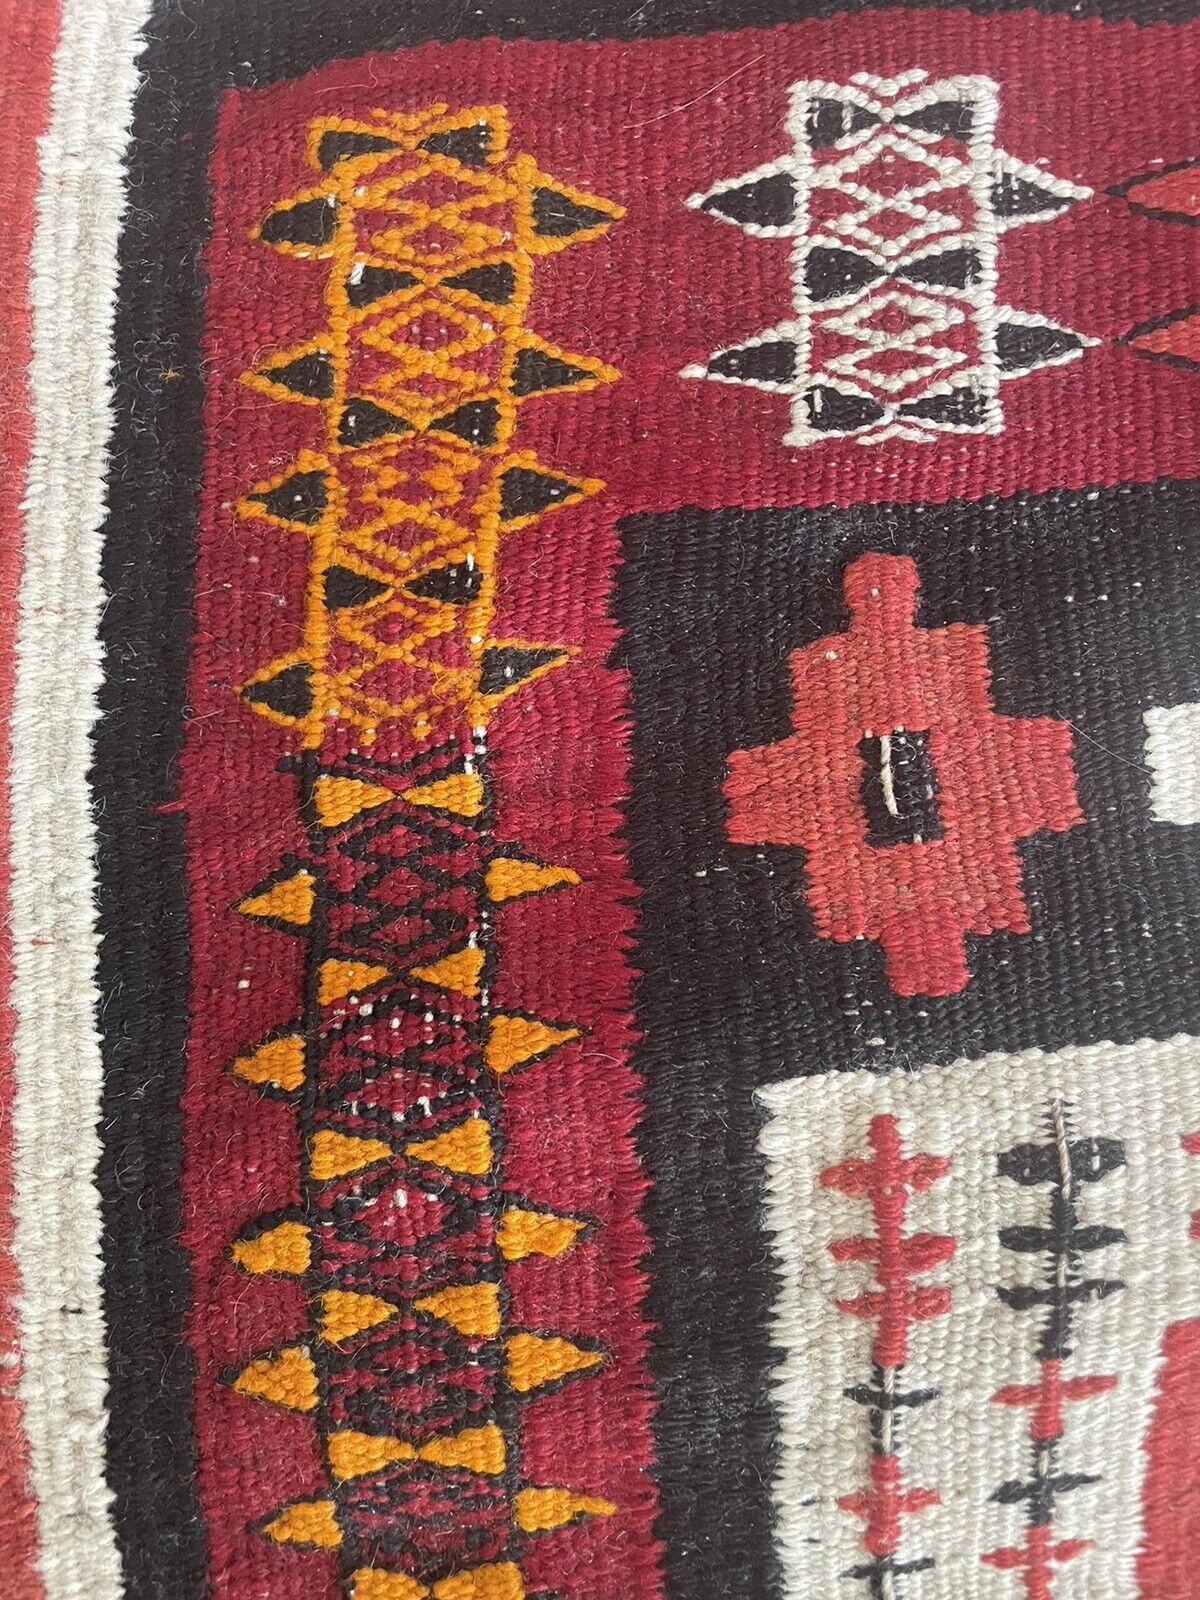 Close-up of age wear on Handmade Antique Moroccan Berber Kilim Rug - Detailed view showing signs of age wear, adding to the rug's authenticity and character.